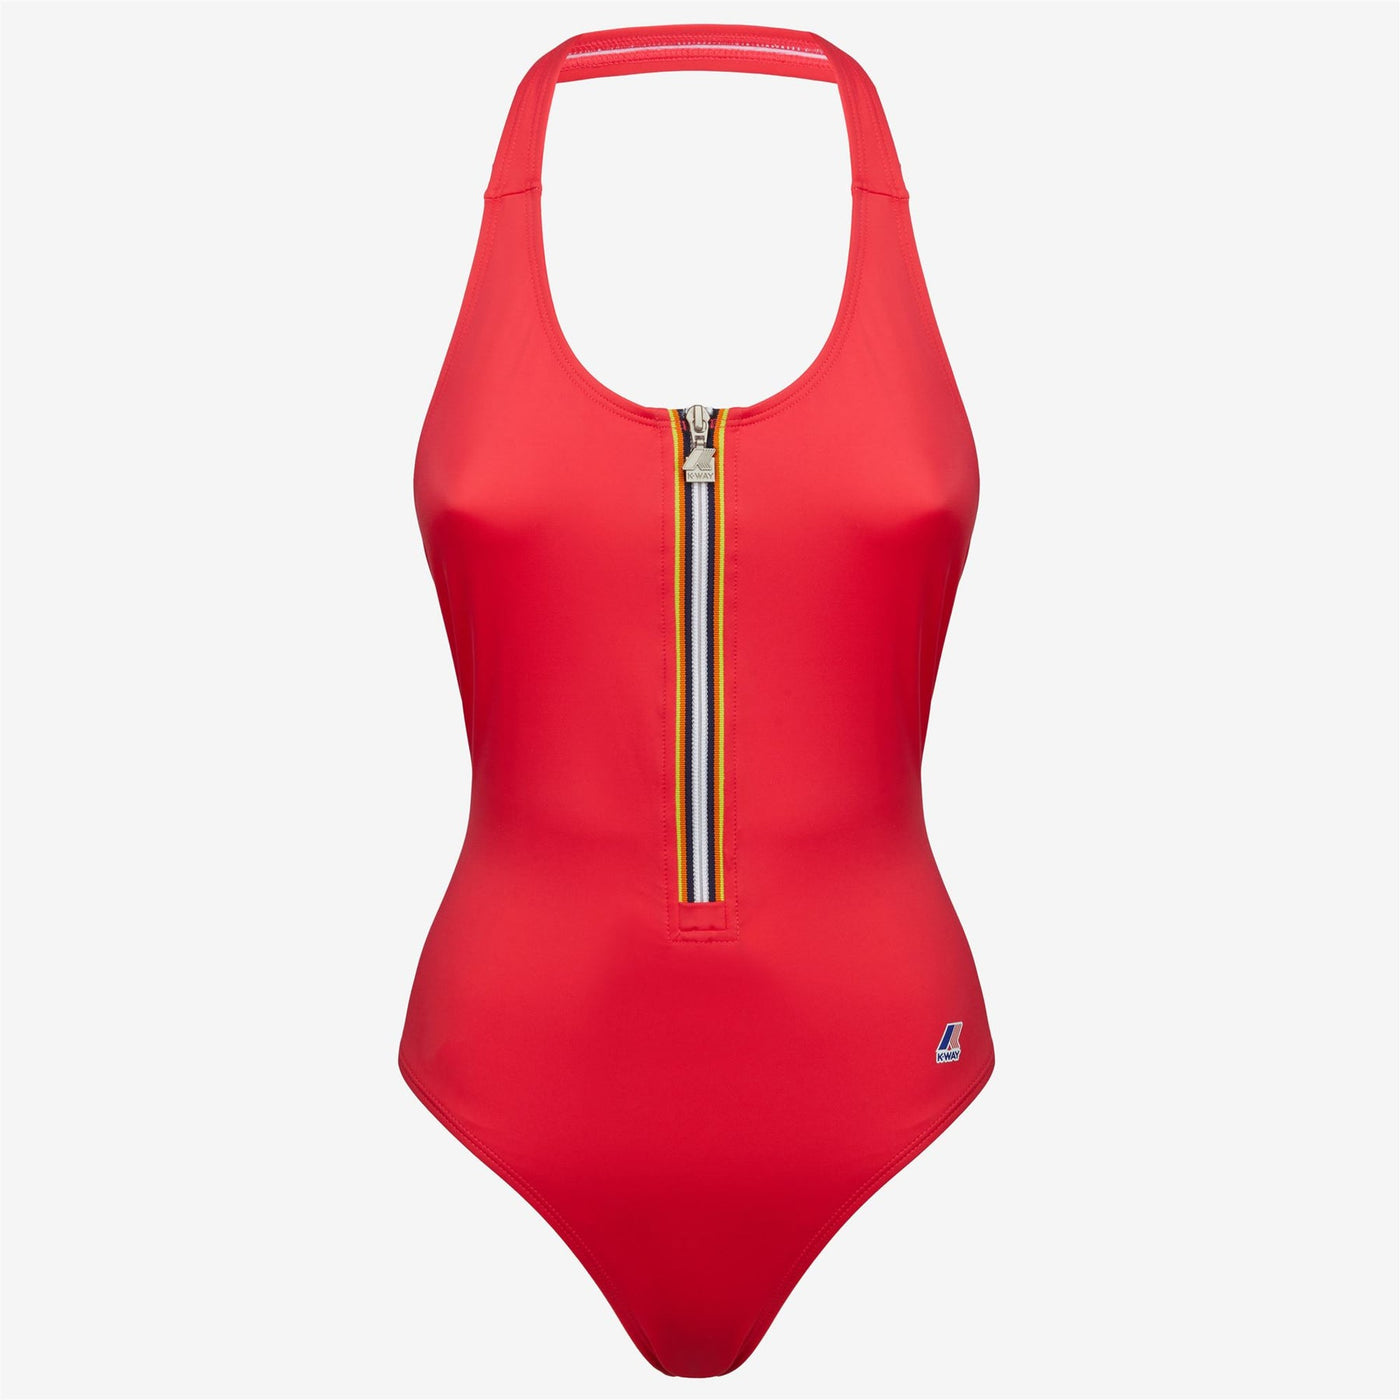 Sylvie Beach - Bathing Suits - Swimsuit - Woman - RED BERRY